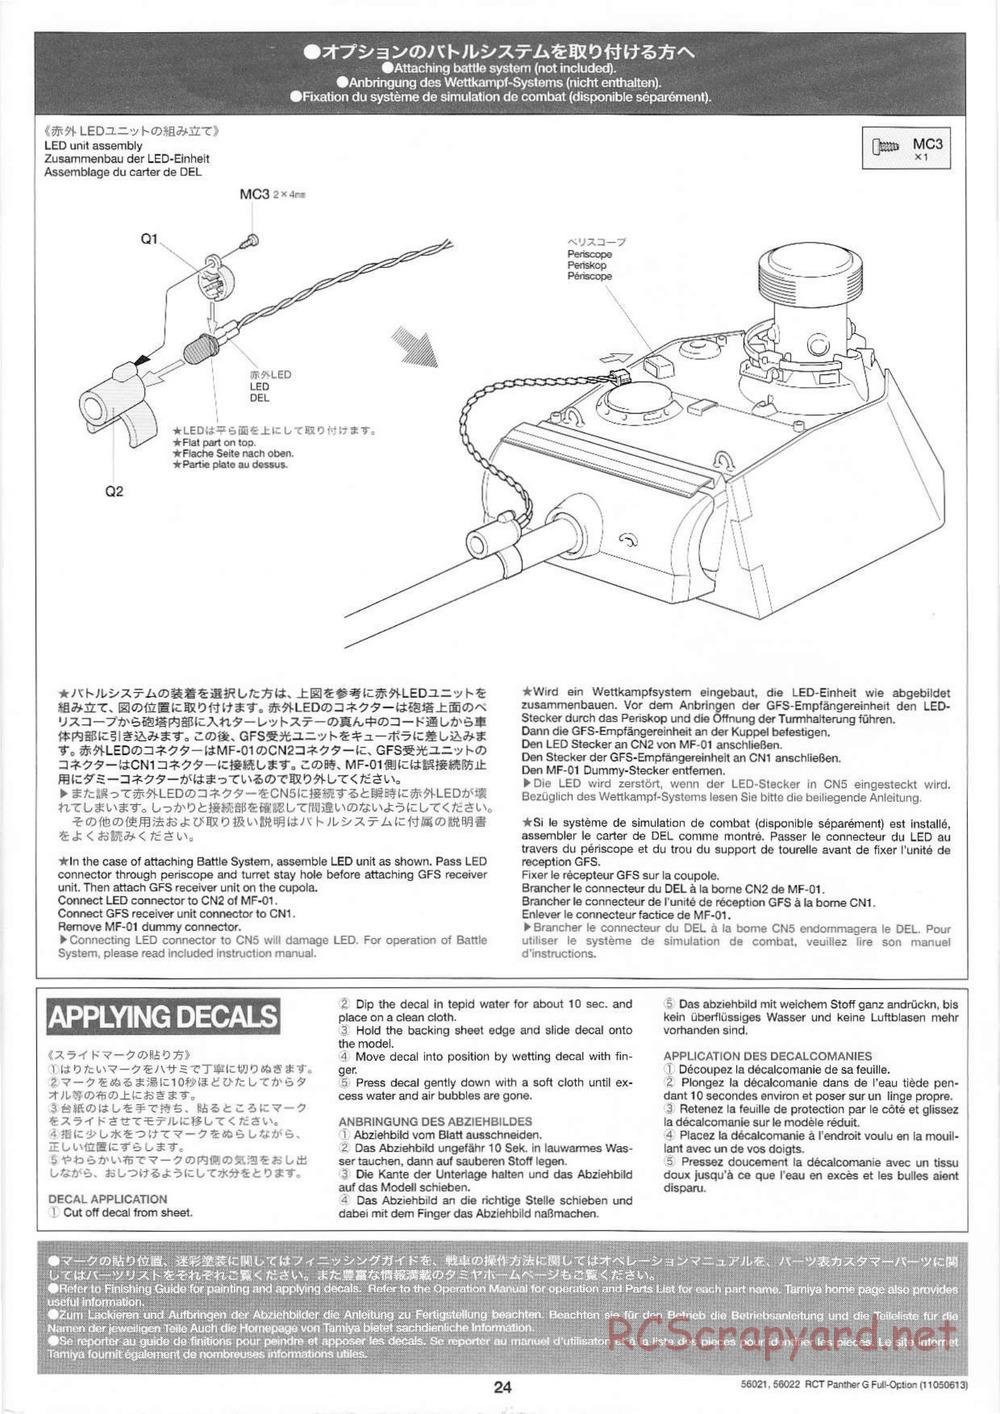 Tamiya - Panther Type G - 1/16 Scale Chassis - Manual - Page 24